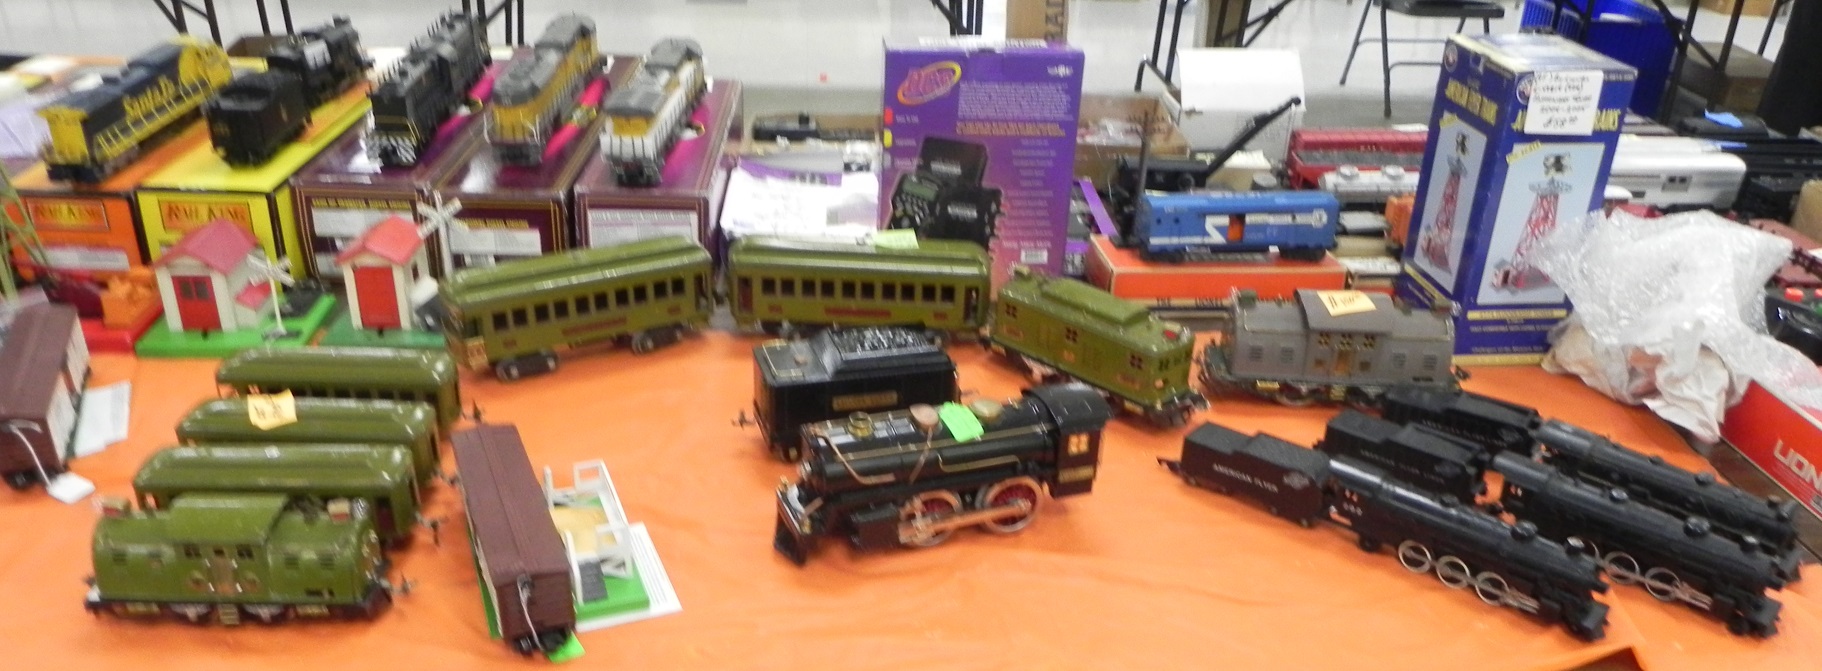 Tables full of trains for sale at the monthly train meet